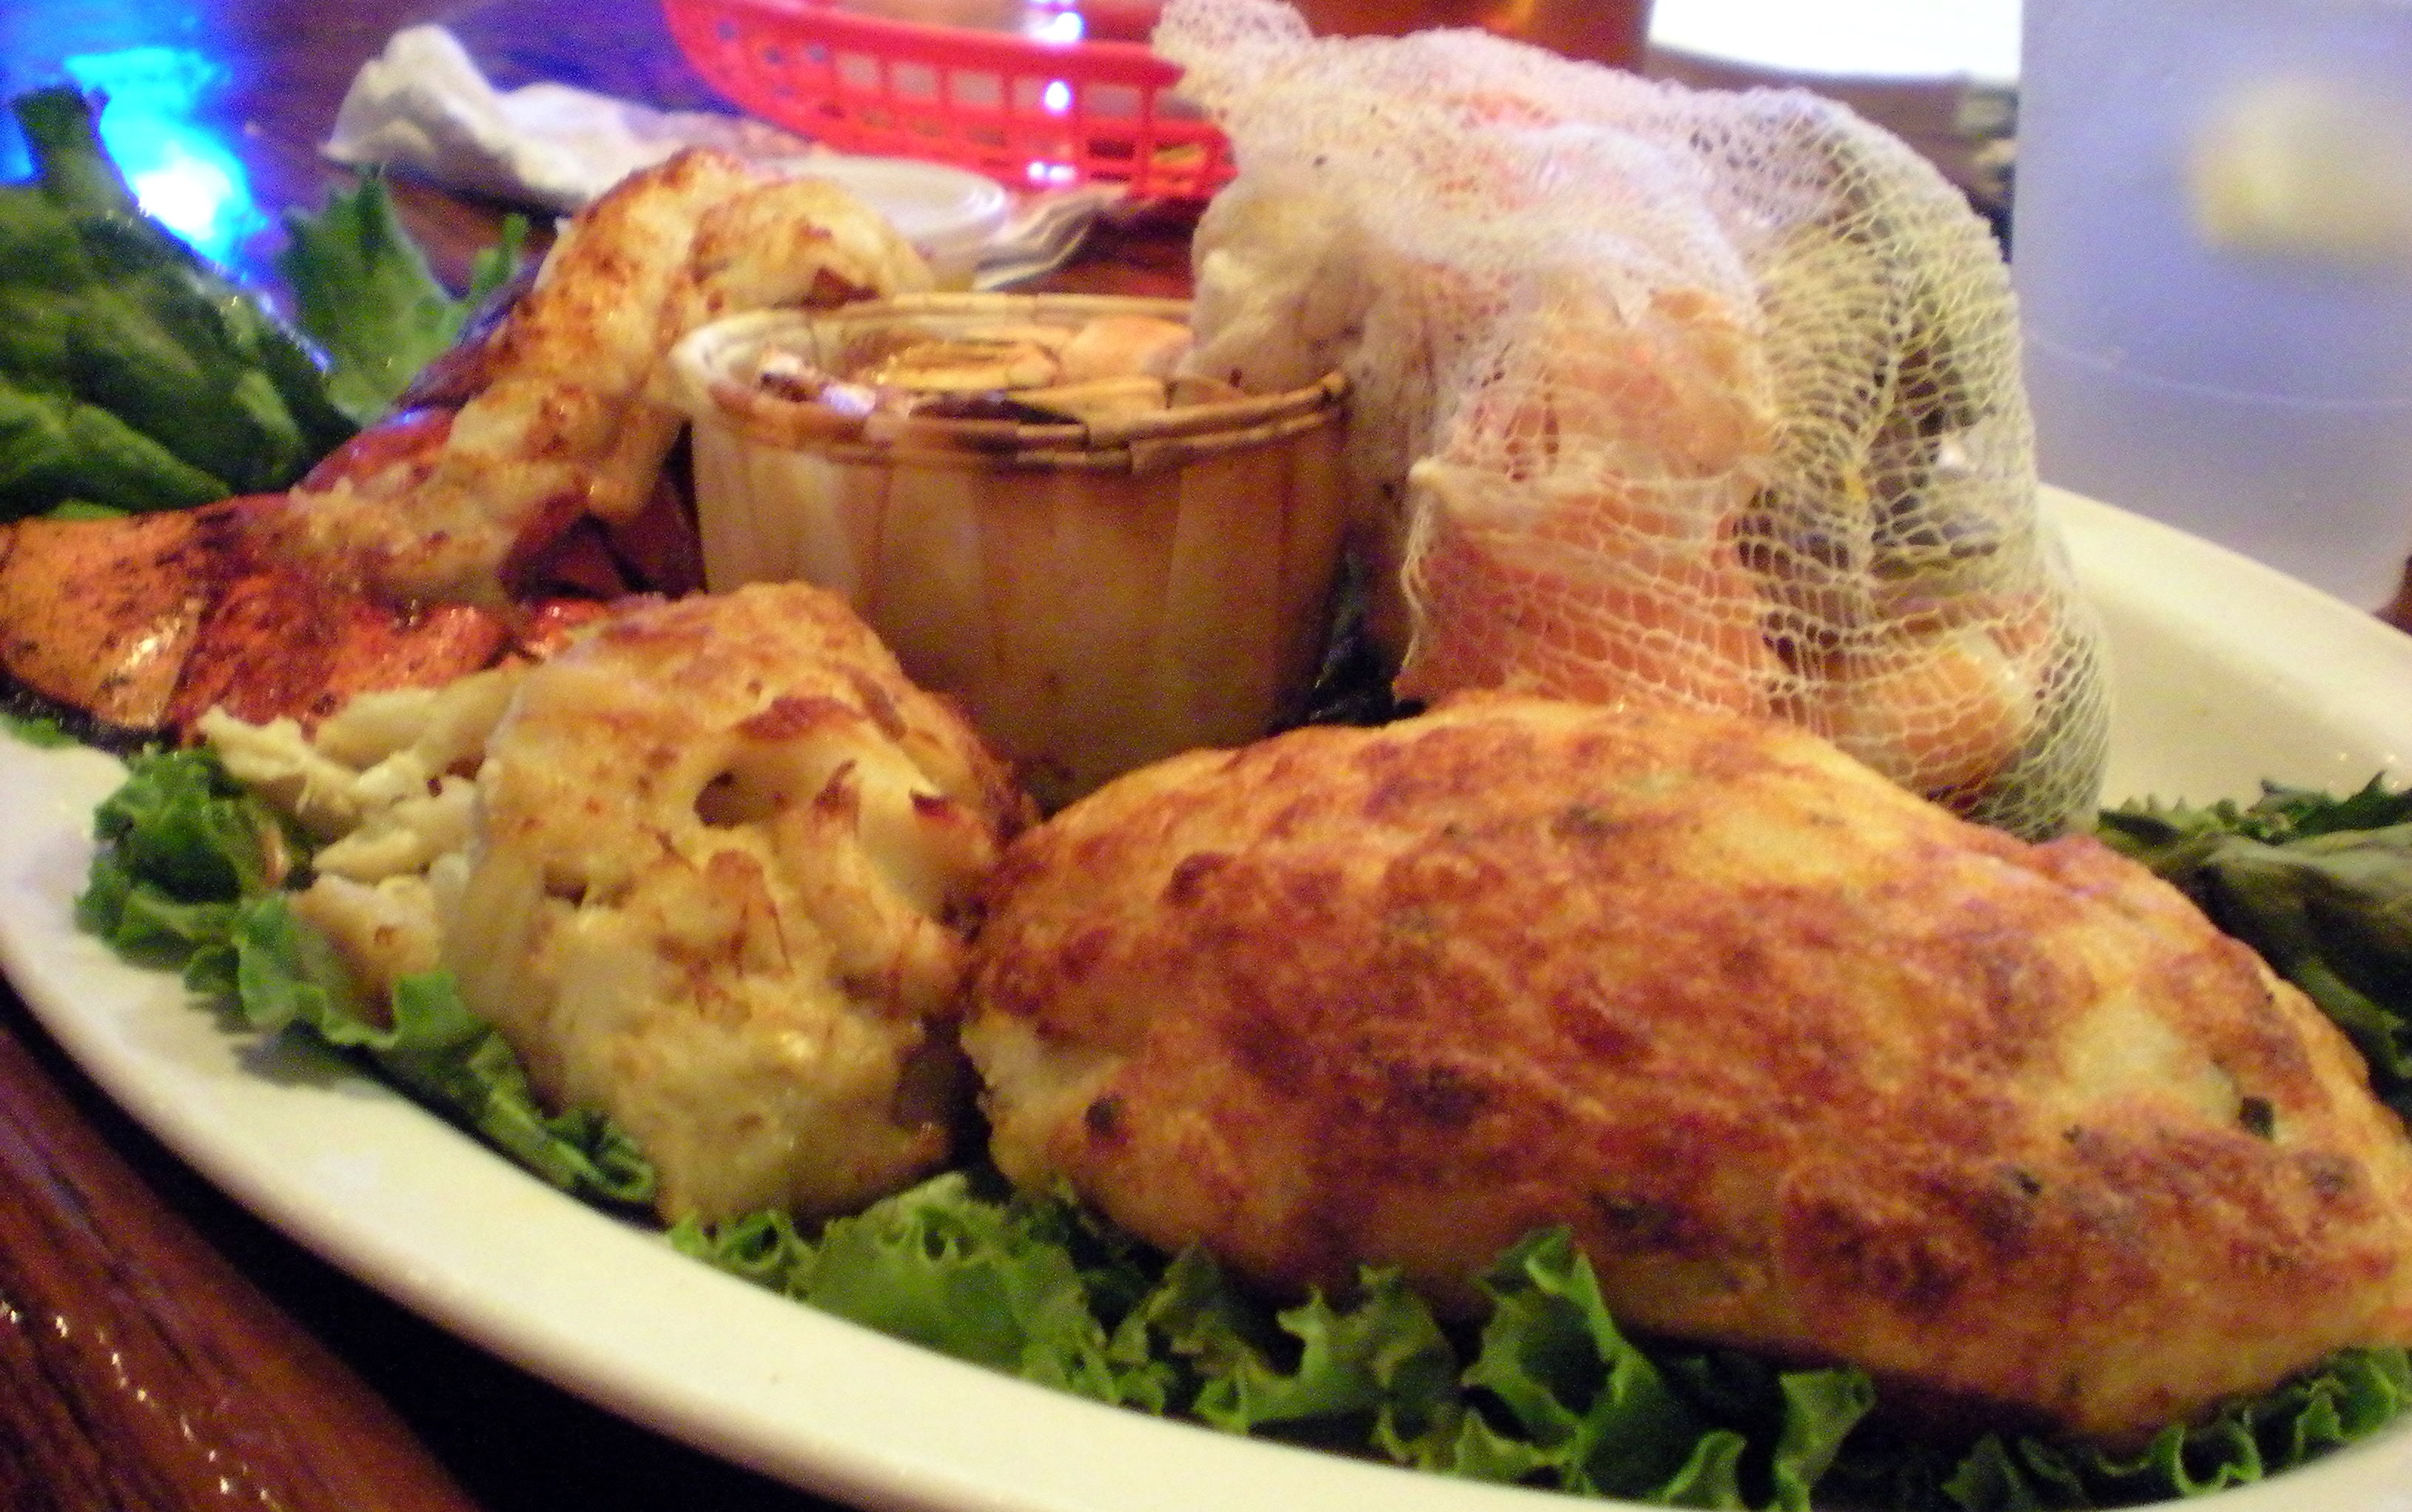 Ted: Net Catch which included a twice baked potato, lobster tail, rock fish, crab imperial with shrimp, crab cake, steamed crab-shrimp-little necks for $29.00